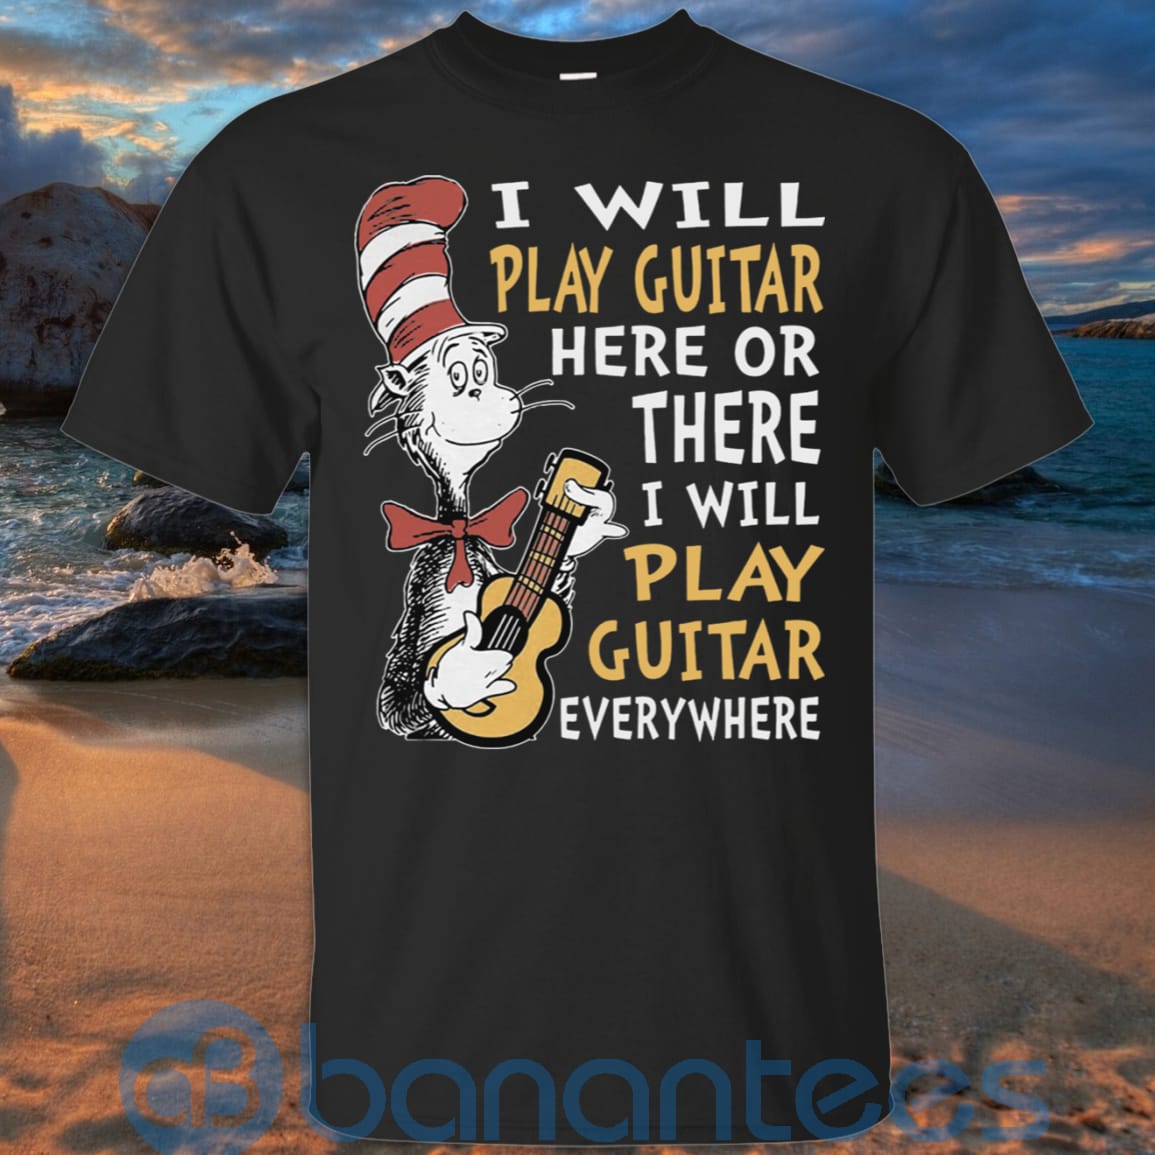 I Will Play Guitar Here Or There I Will Play Guitar Everywhere T-Shirt Hoodie Sweatshirt